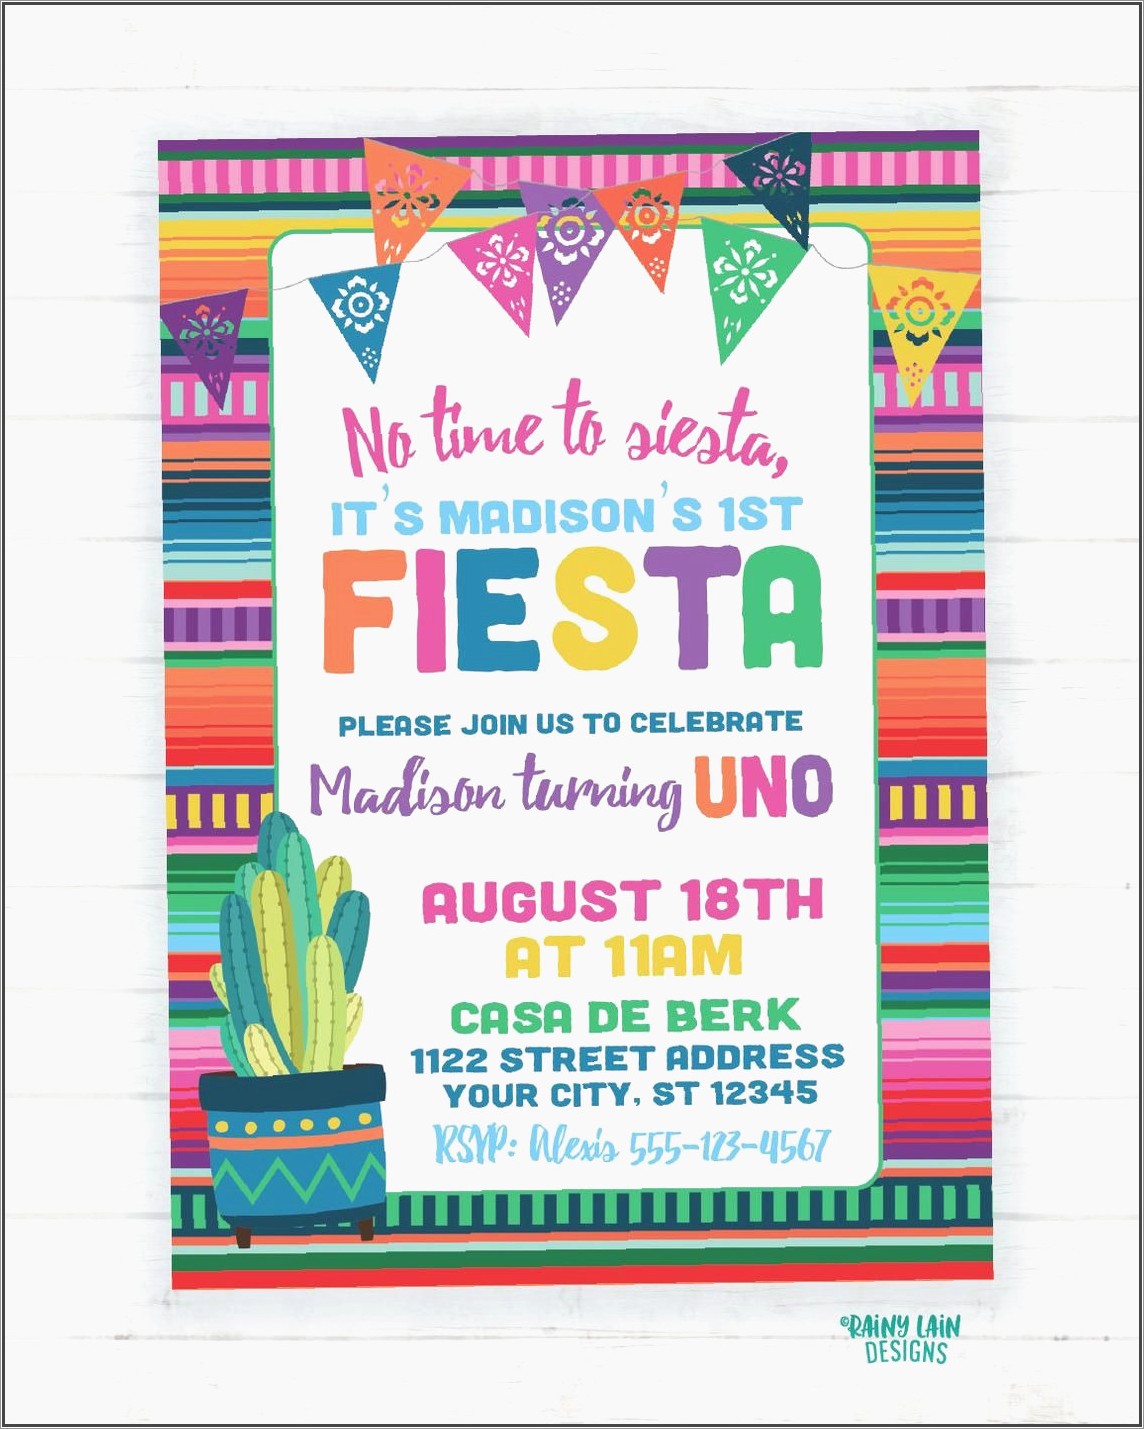 Taco Bout A Baby Invitations